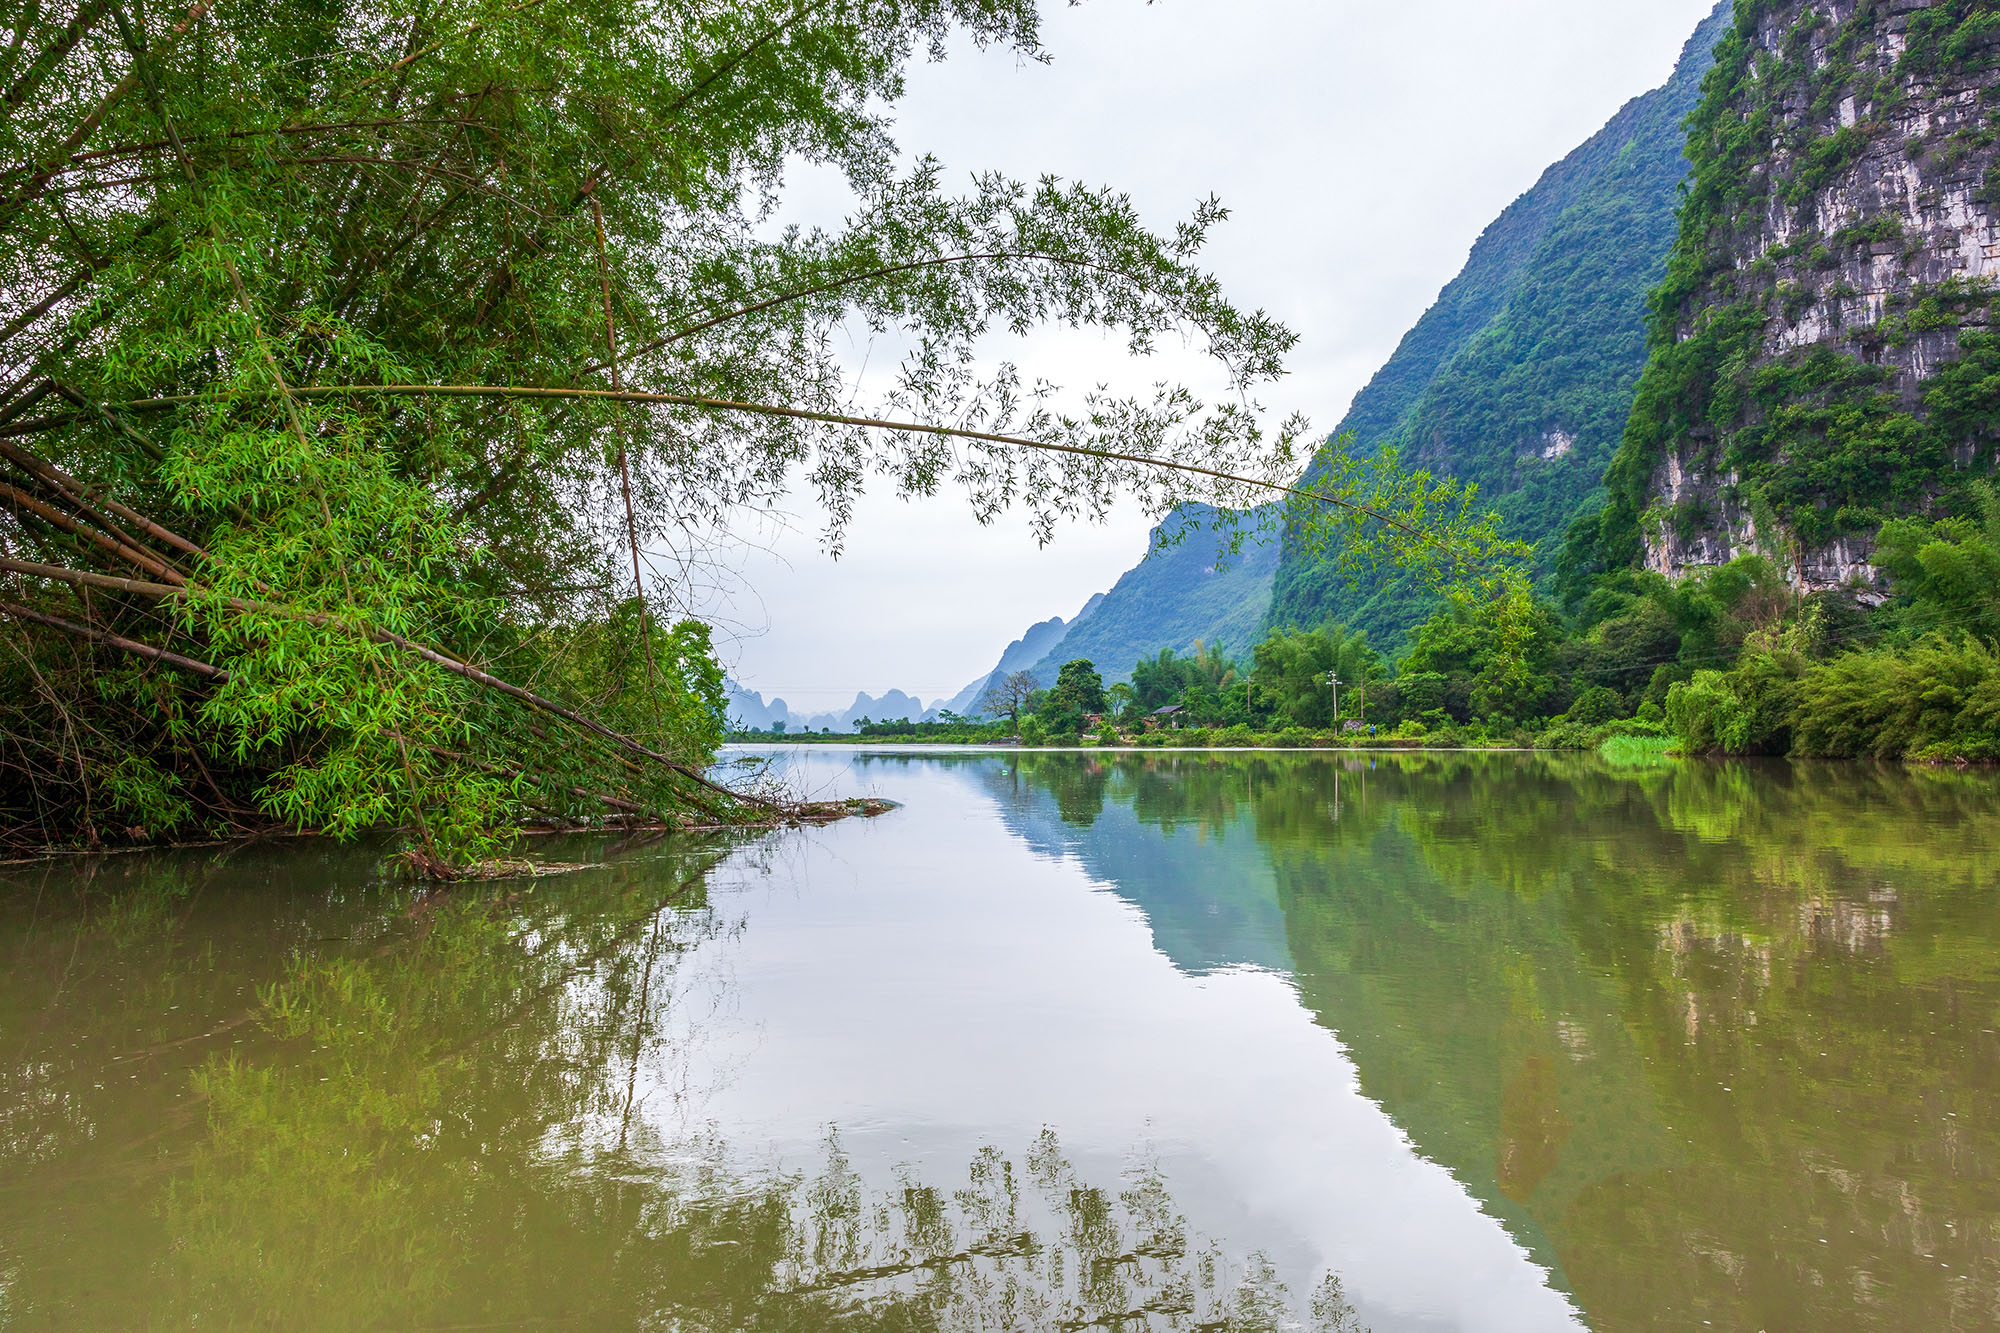 On a traditional raft along the Li River, this image captures a serene moment. Towering mountains and lush bamboo groves are...